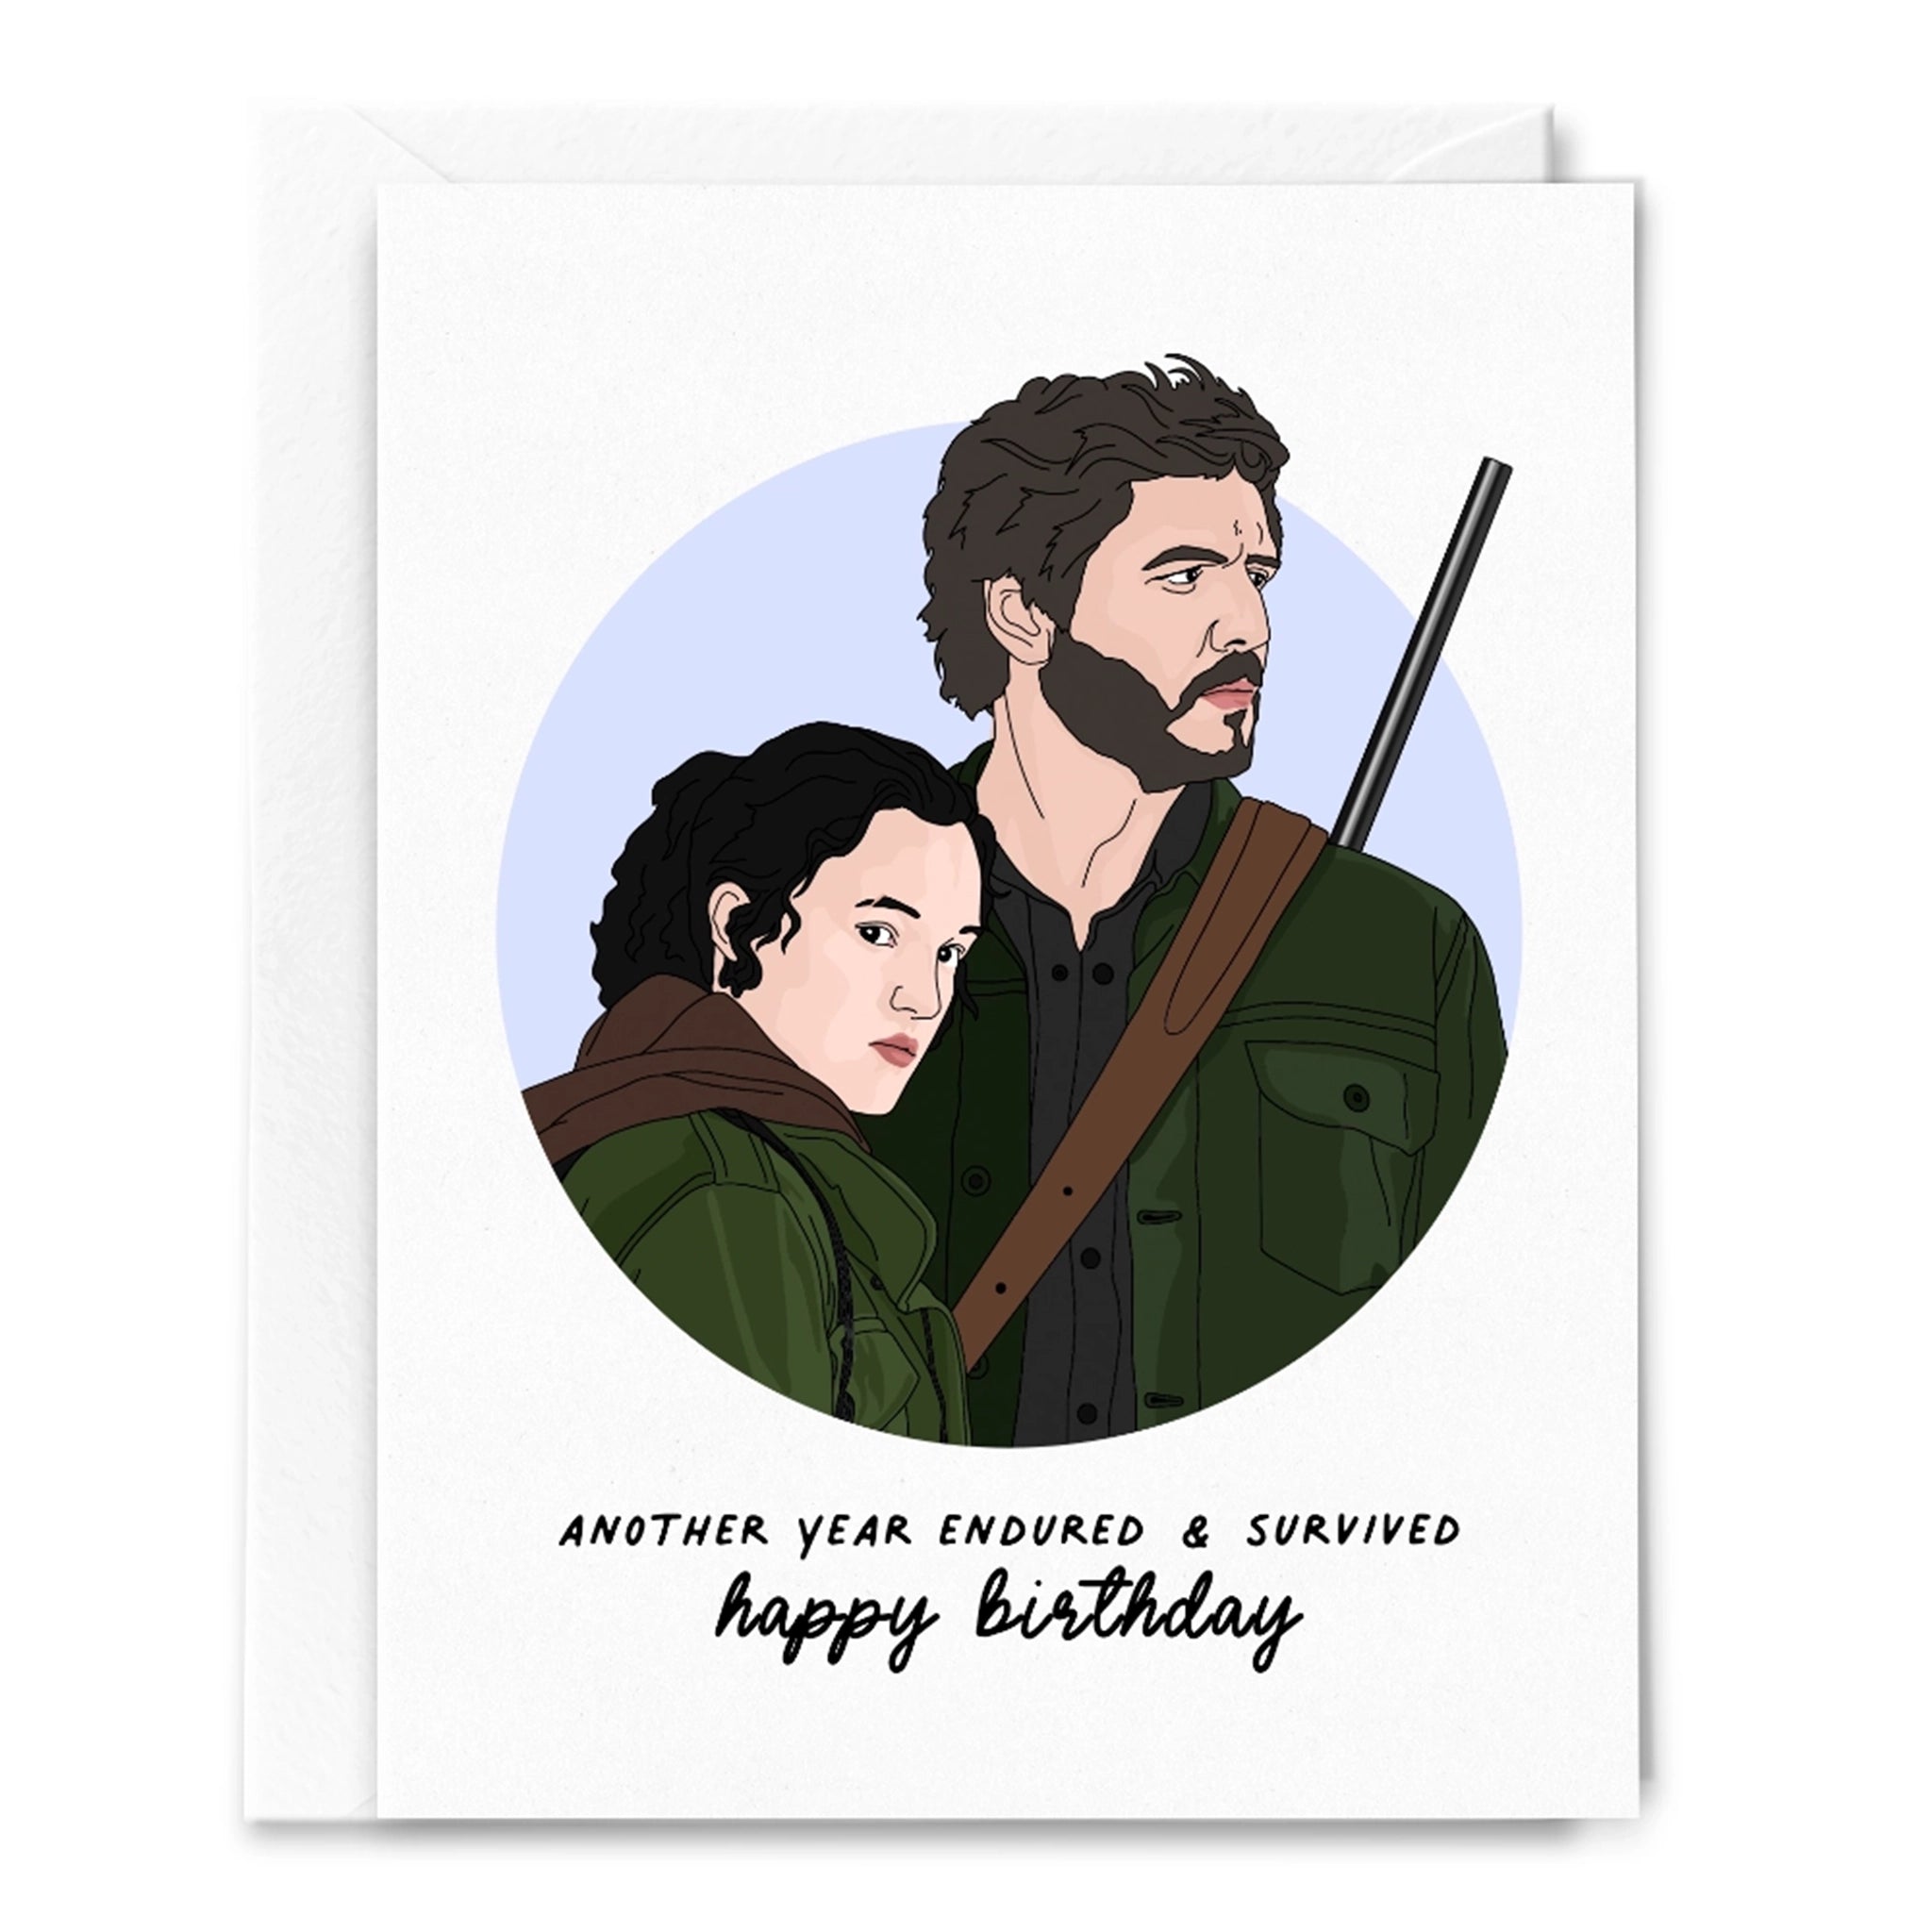 On a white background is a white card with an illustration of the main characters of the show along with black text at the bottom that reads, &quot;Another Year Endured &amp; Survived Happy Birthday&quot;.